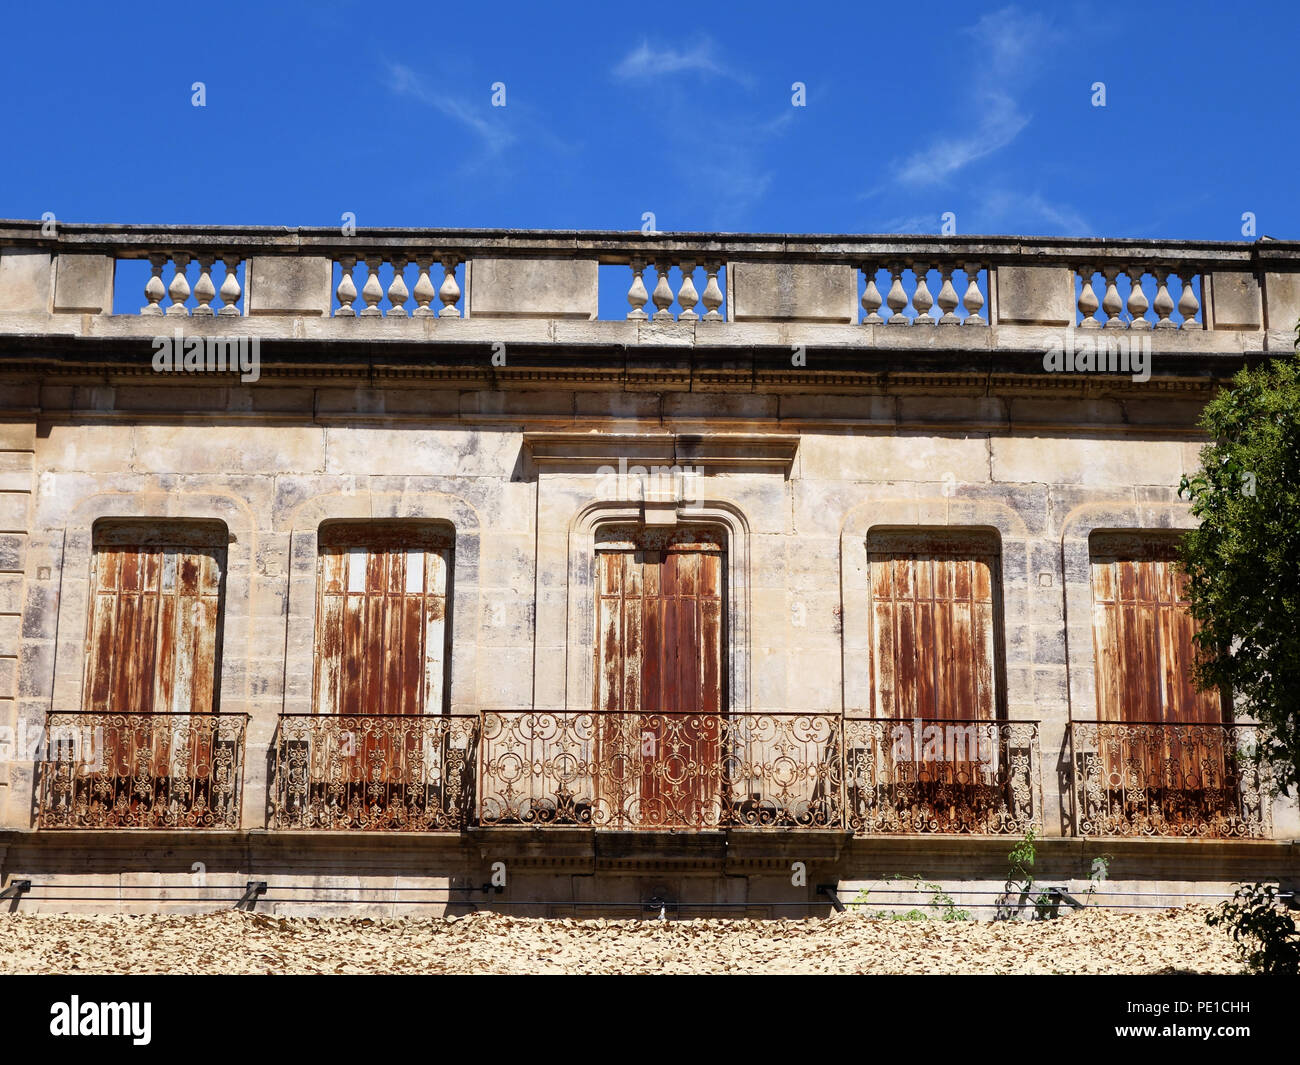 Blue Window Shutters And Awnings On Building In Arles Stock Photo Alamy